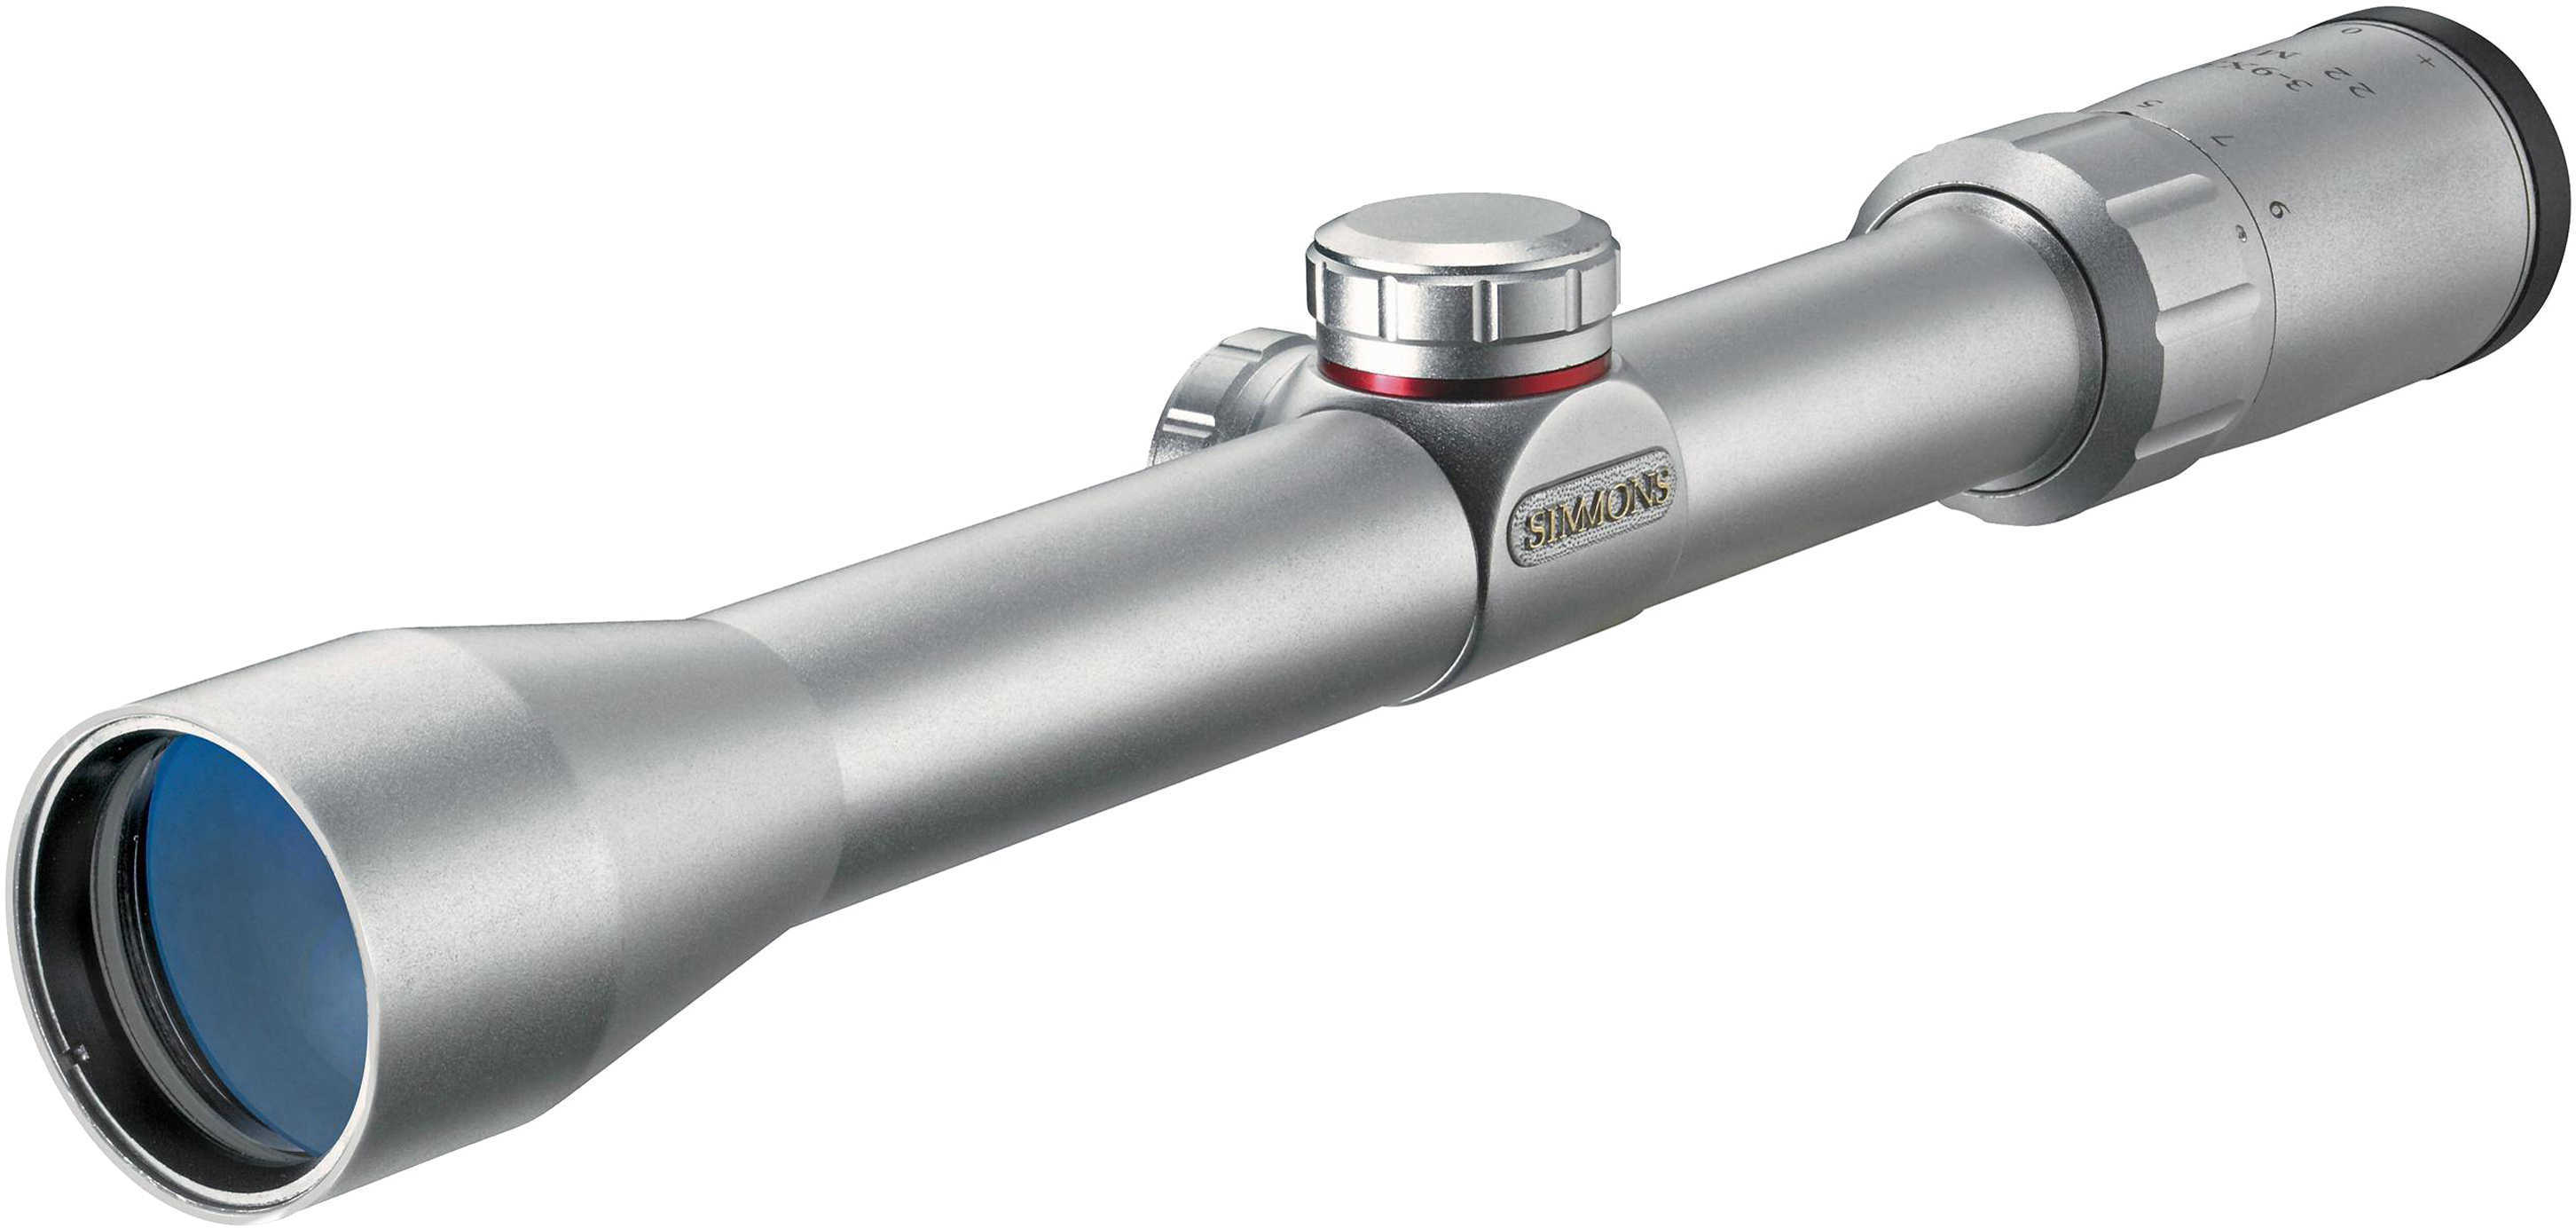 Simmons 22Mag Rifle Scope 3-9X32 1" TruPlex Reticle 0.25MOA Adjustable Objective Includes Rings Silver Finish 511073